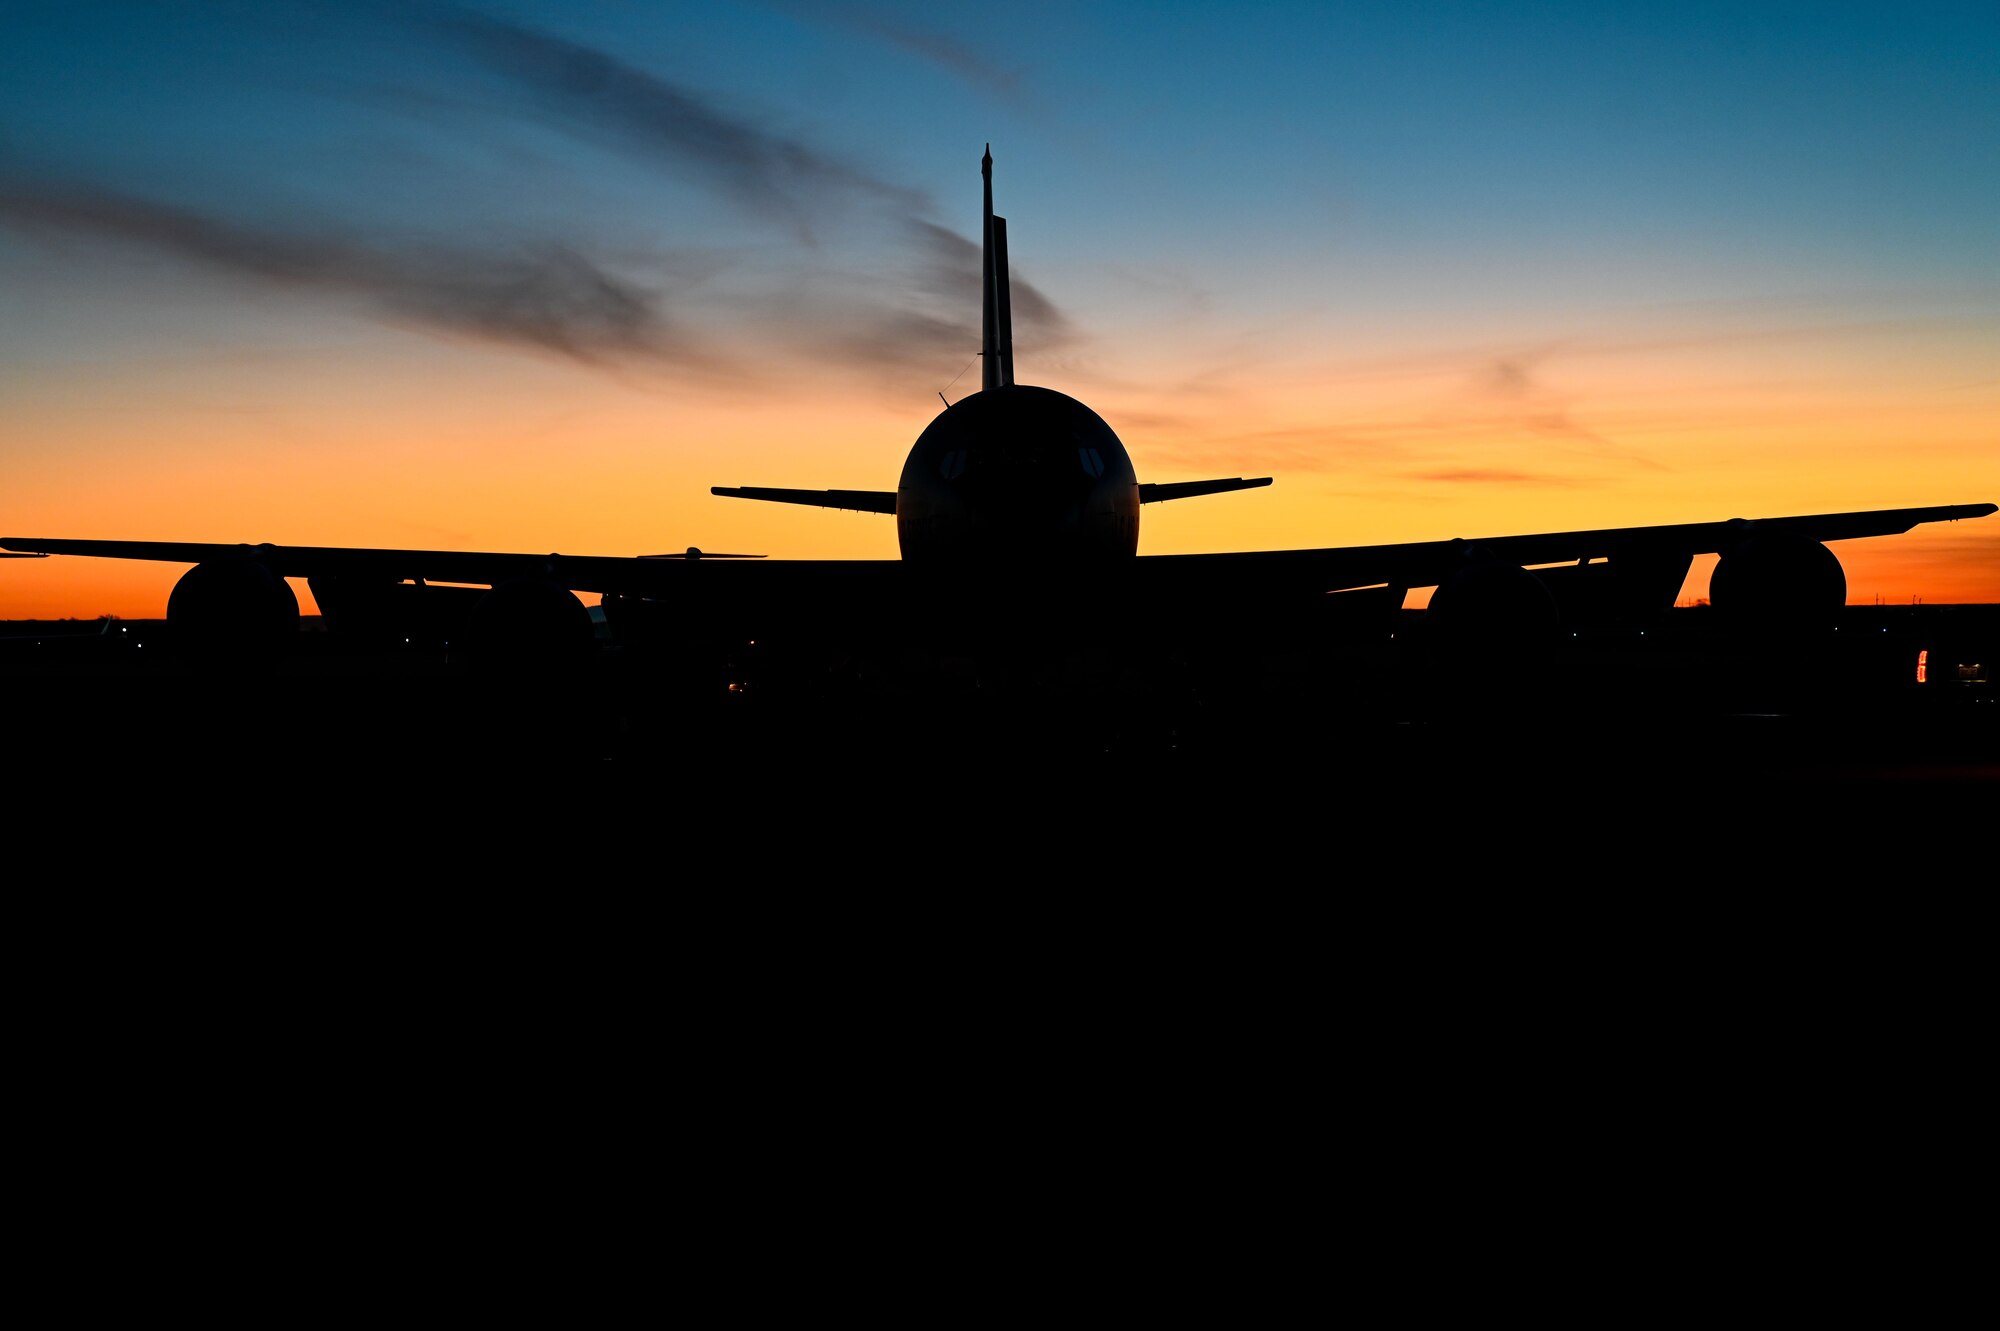 A U.S. Air Force KC-135 Stratotanker prepares for take-off after an aircrew endurance mission at Roswell, New Mexico, Feb. 17, 2023. The 92nd Air Refueling Wing deployed personnel and KC-135 Stratotankers, to execute a Phase 2 Lead Wing exercise in preparation to be lead tanker wing at Air Mobility Command’s capstone exercise, Mobility Guardian 2023. (U.S. Air Force photo by Airman 1st Class Haiden Morris)